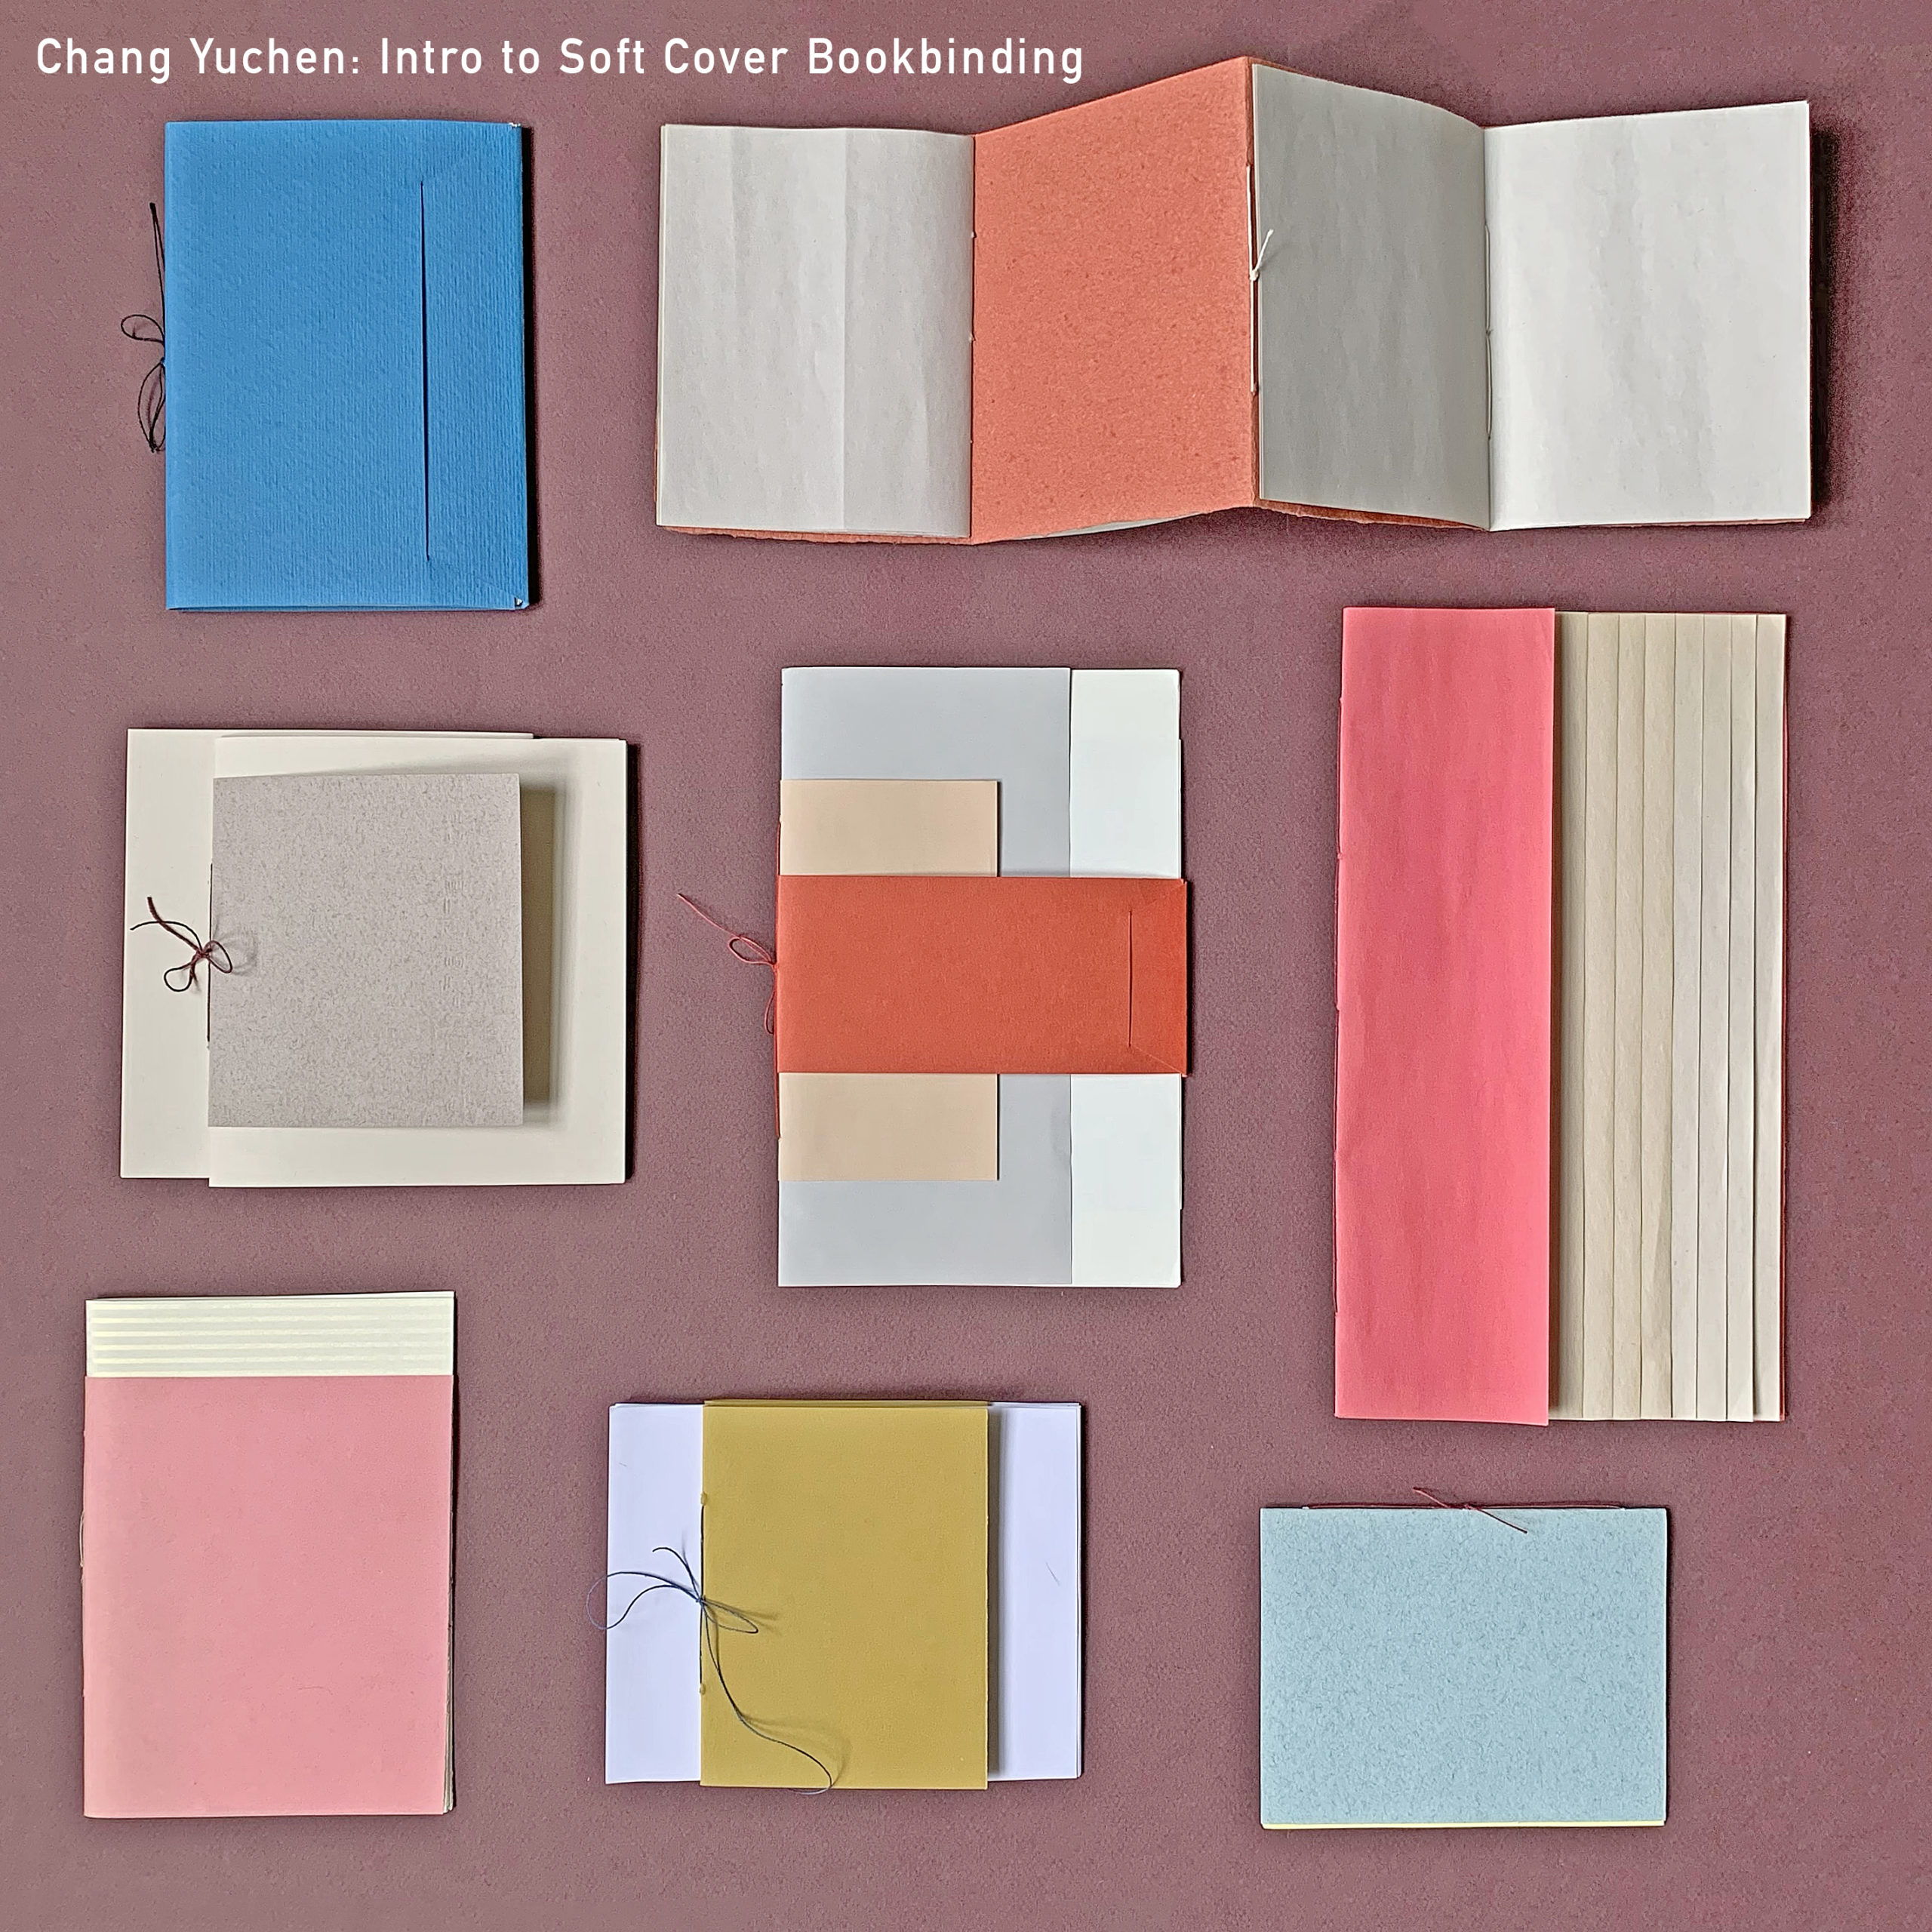 soft cover bookbinding